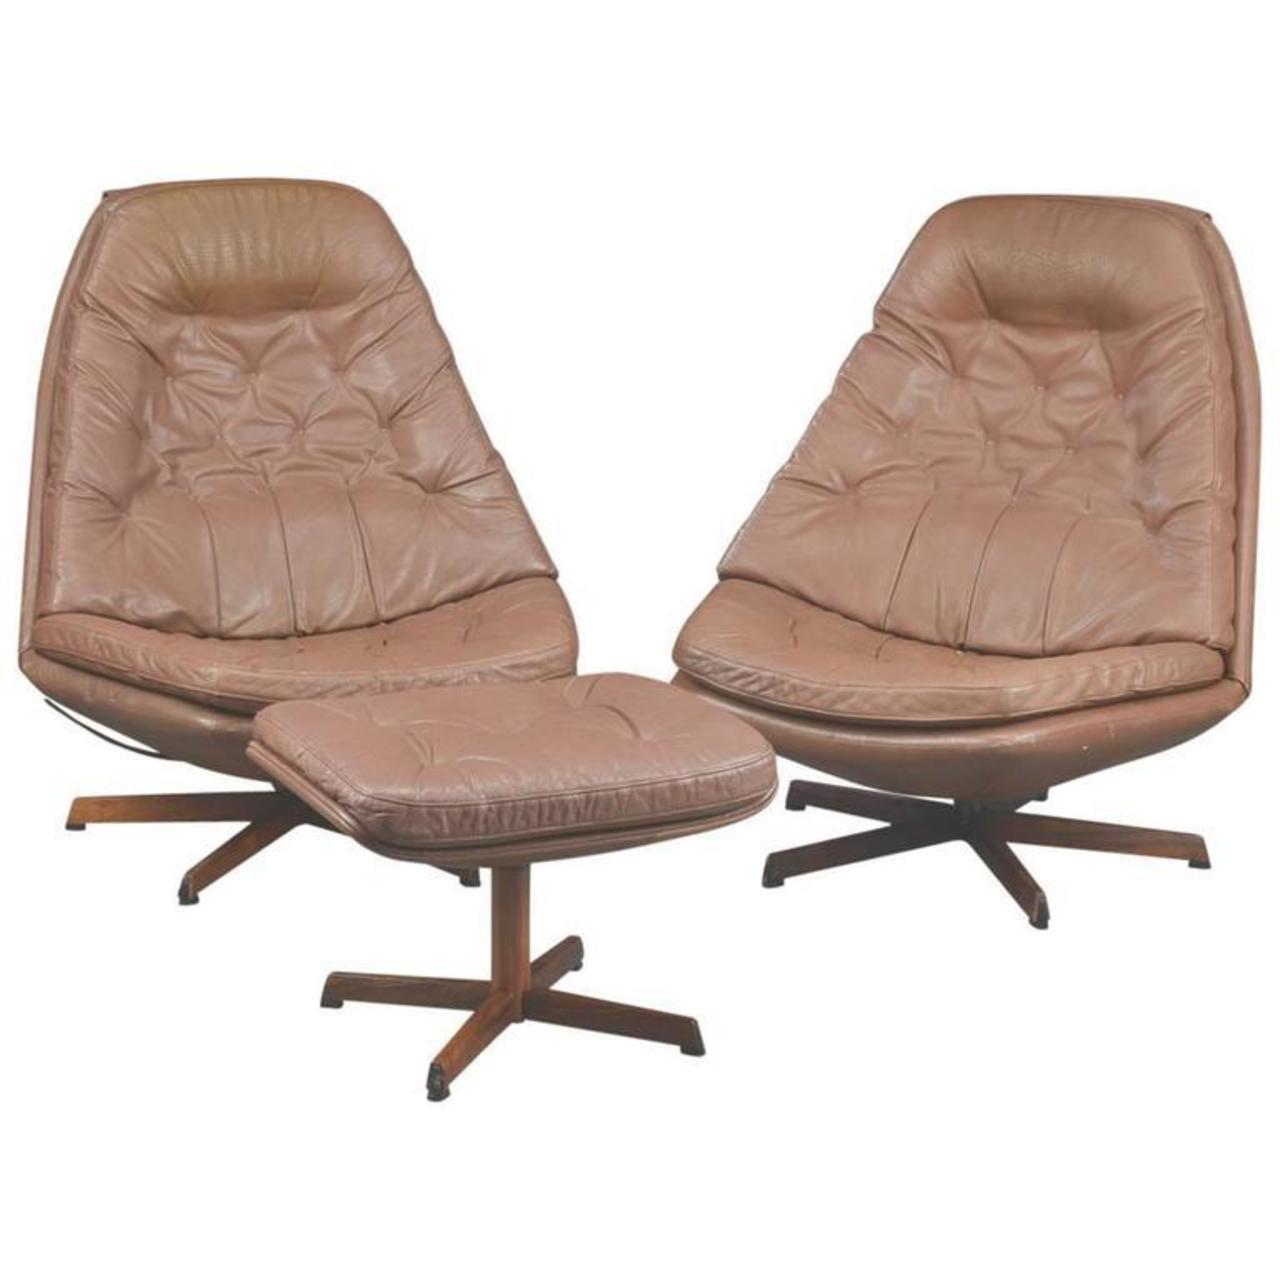 Pair Of 1960s Danish Leather Swivel Chairs By Madsen Schubel